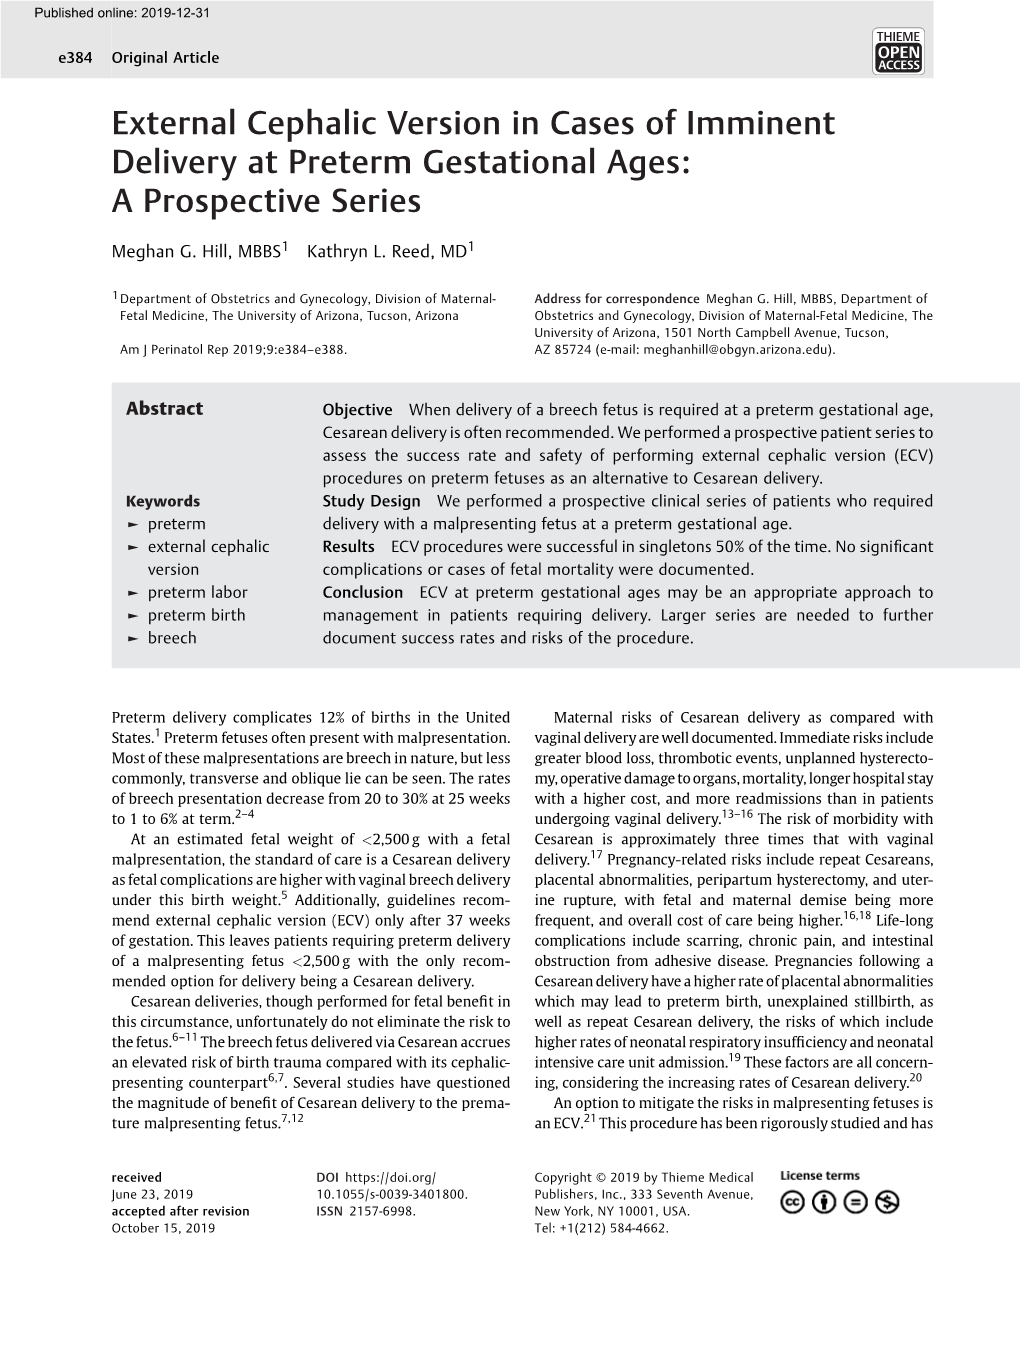 External Cephalic Version in Cases of Imminent Delivery at Preterm Gestational Ages: Aprospectiveseries